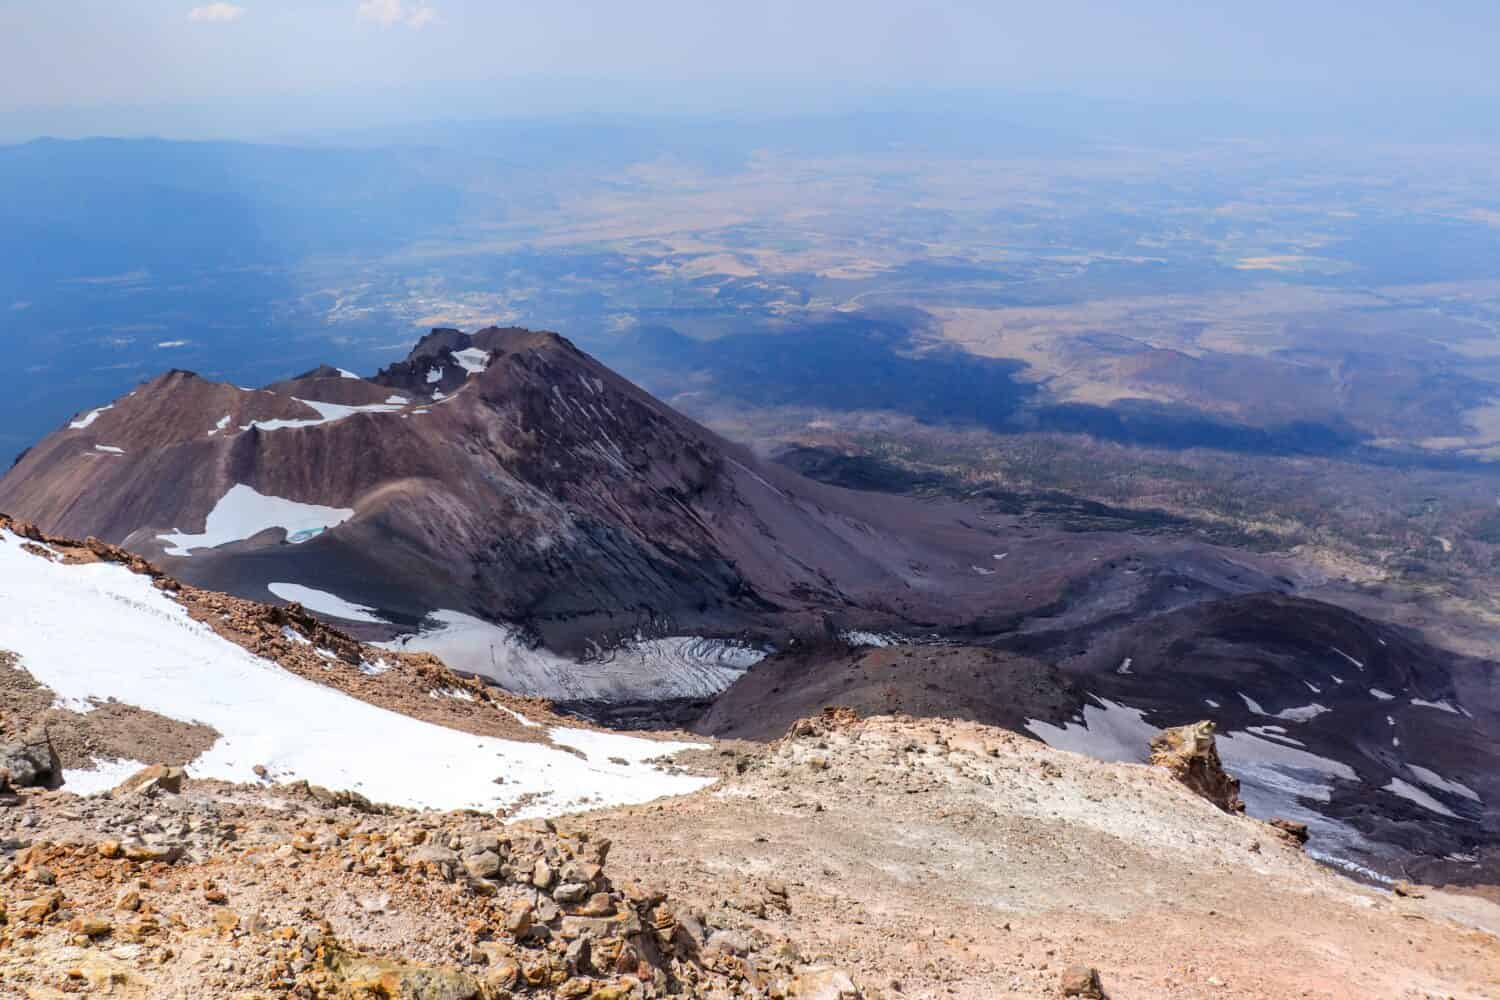 View into the northern California hazy with wildfires from the slopes of the volcano Mount Shasta, CA, USA in the summer 2022.